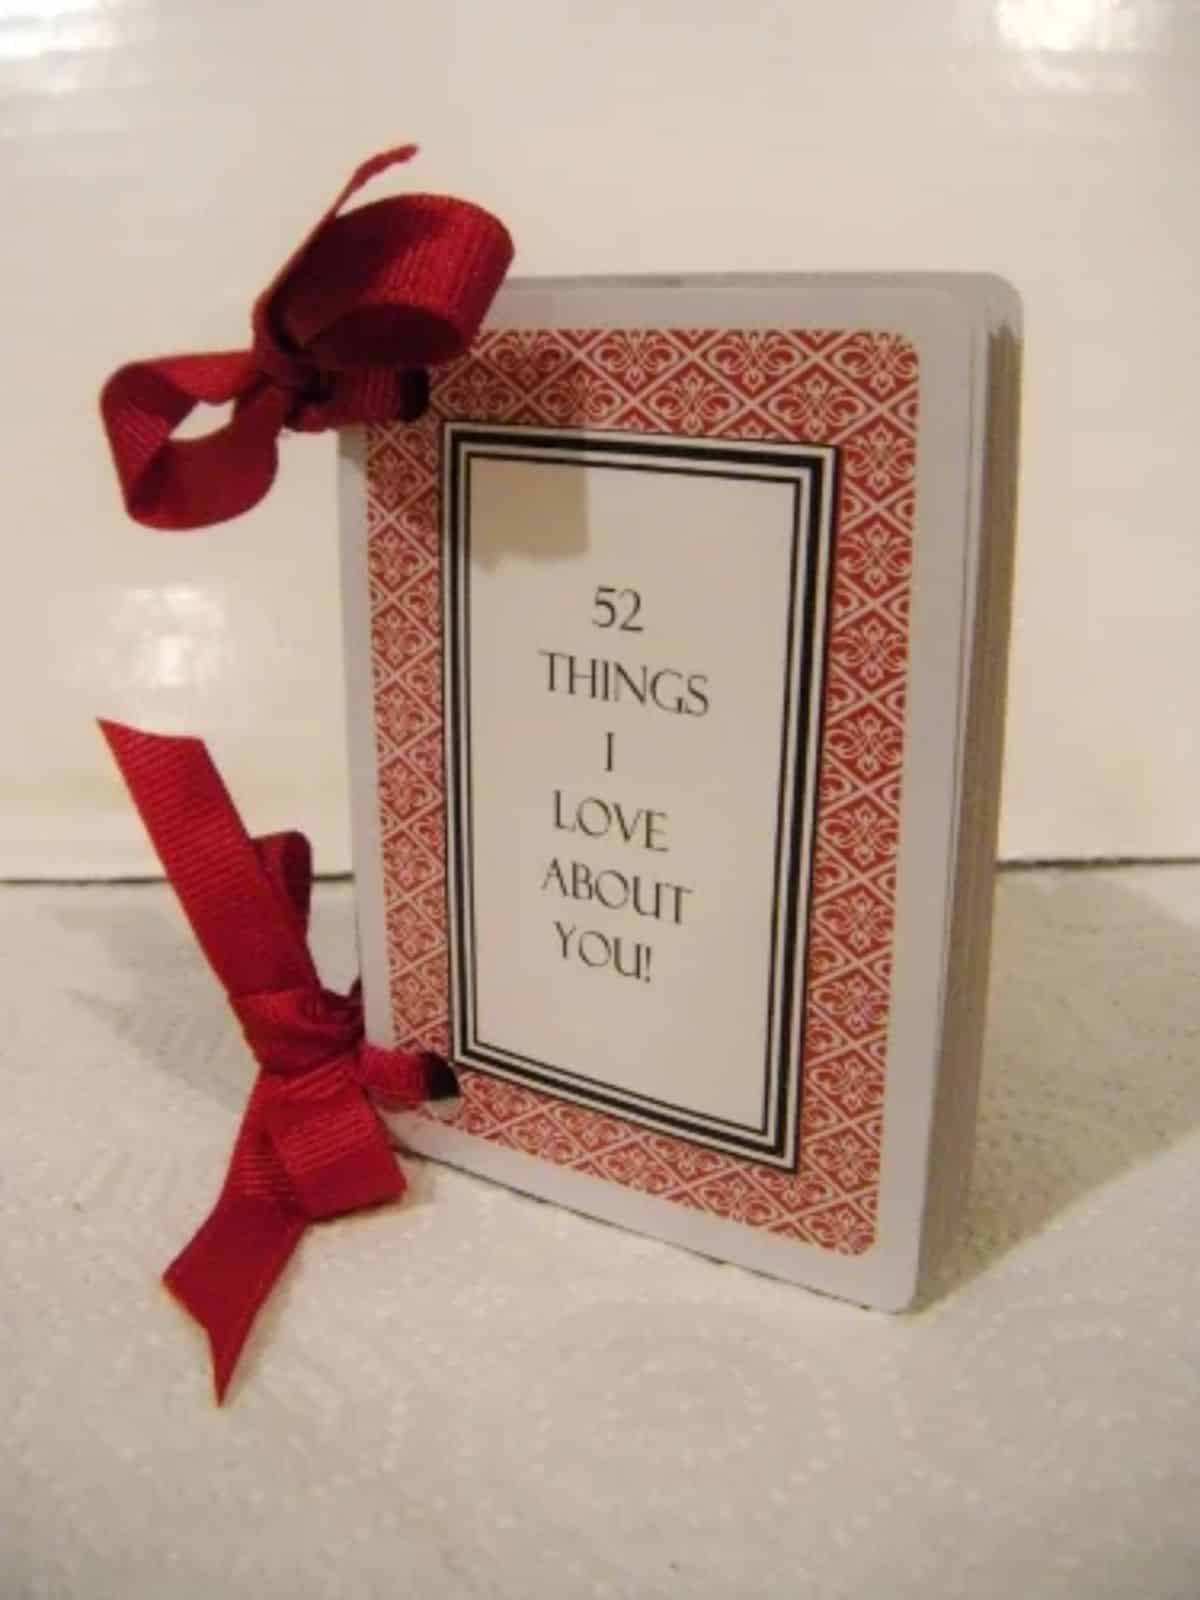 50+ Things I Love About You Card